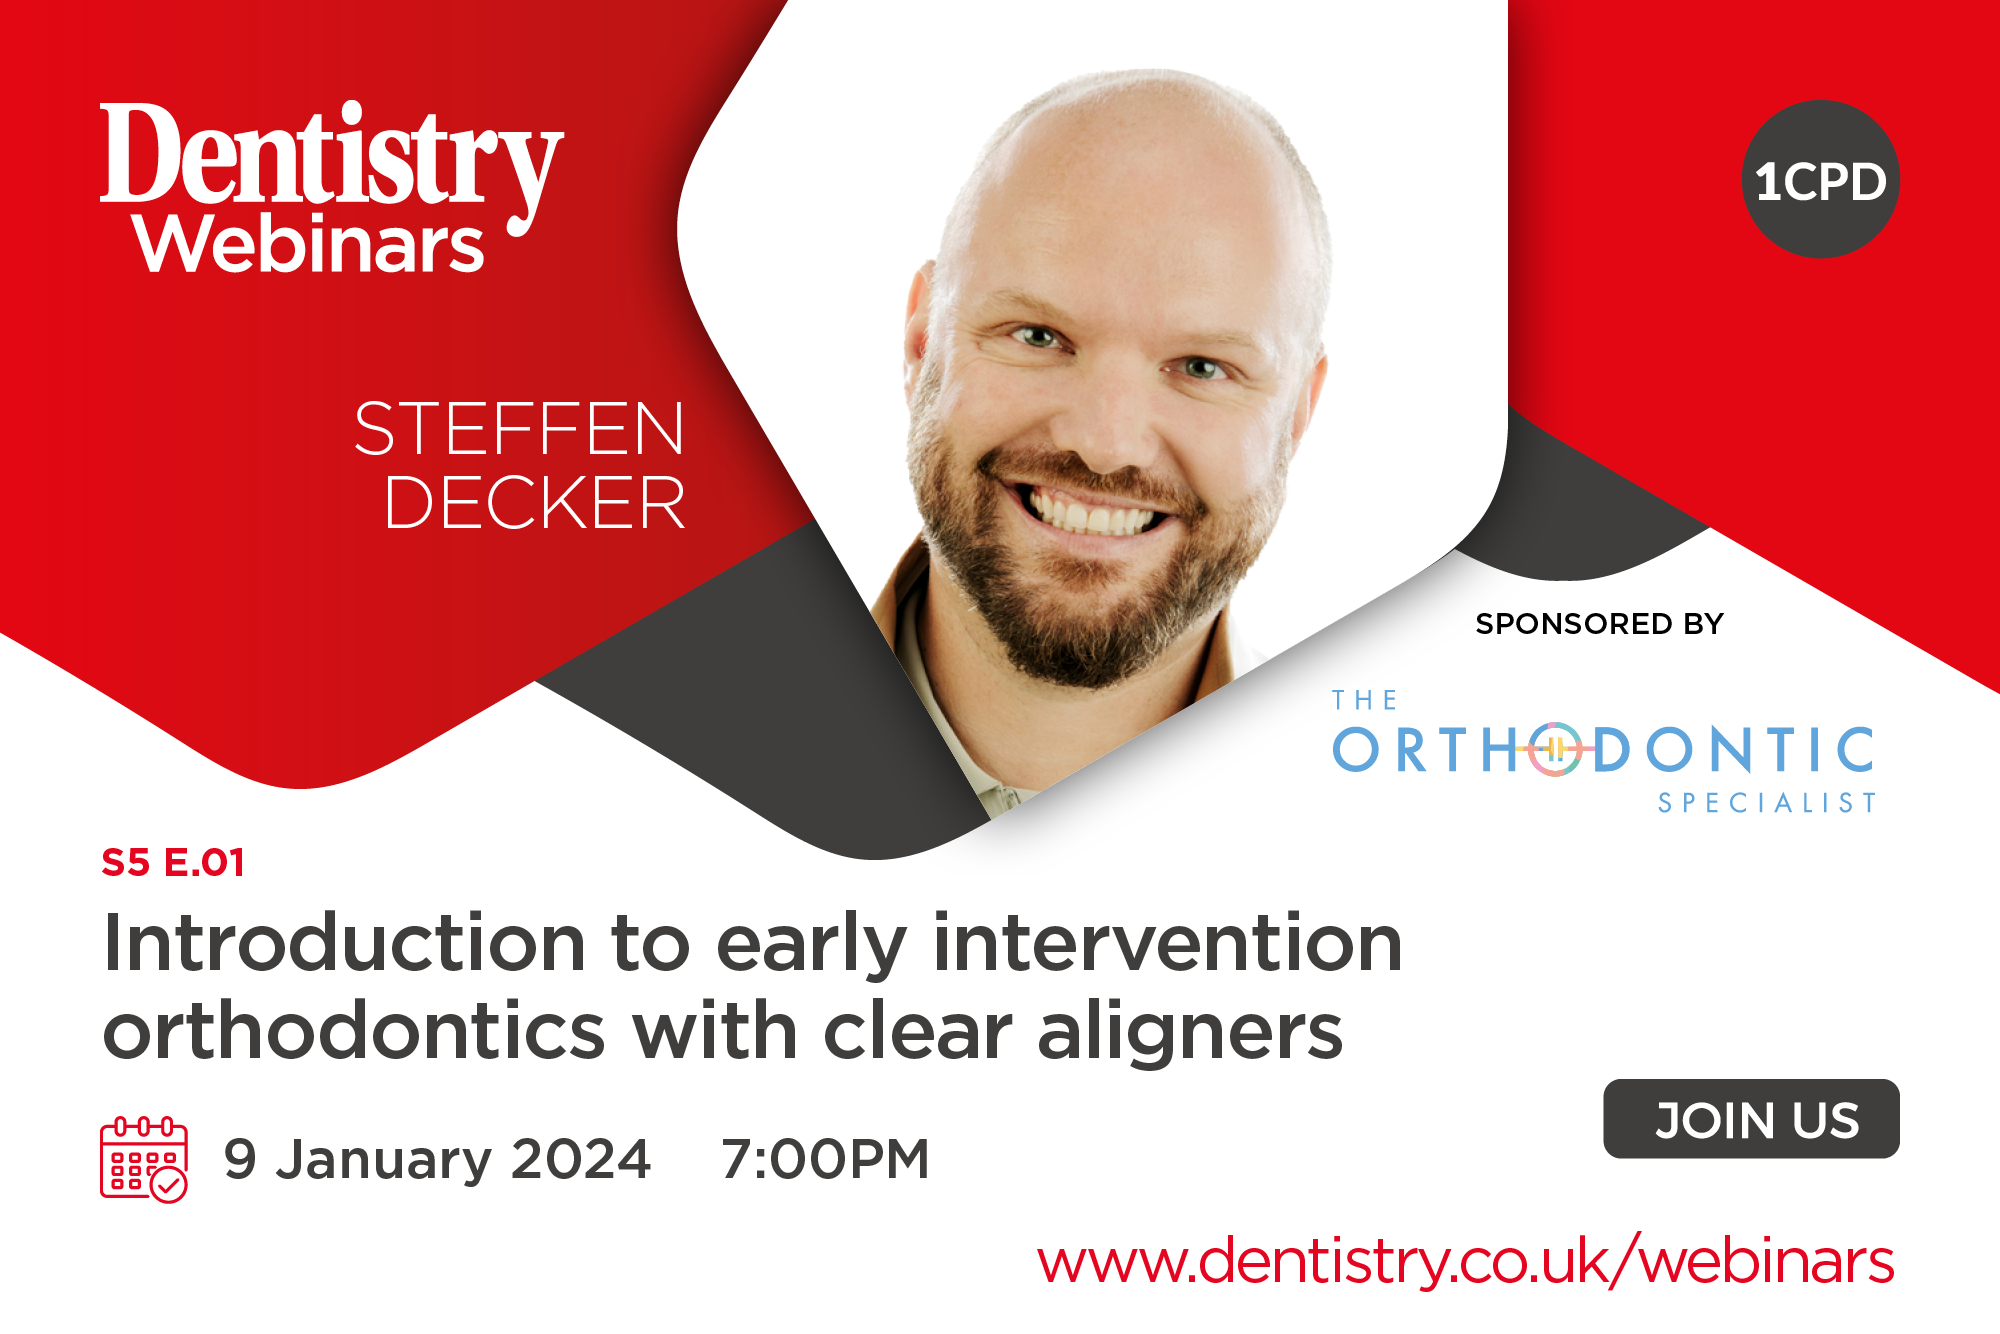 Join Steffen Decker on Tuesday 9 January at 7pm as he discusses an introduction to early intervention orthodontics with clear aligners. 